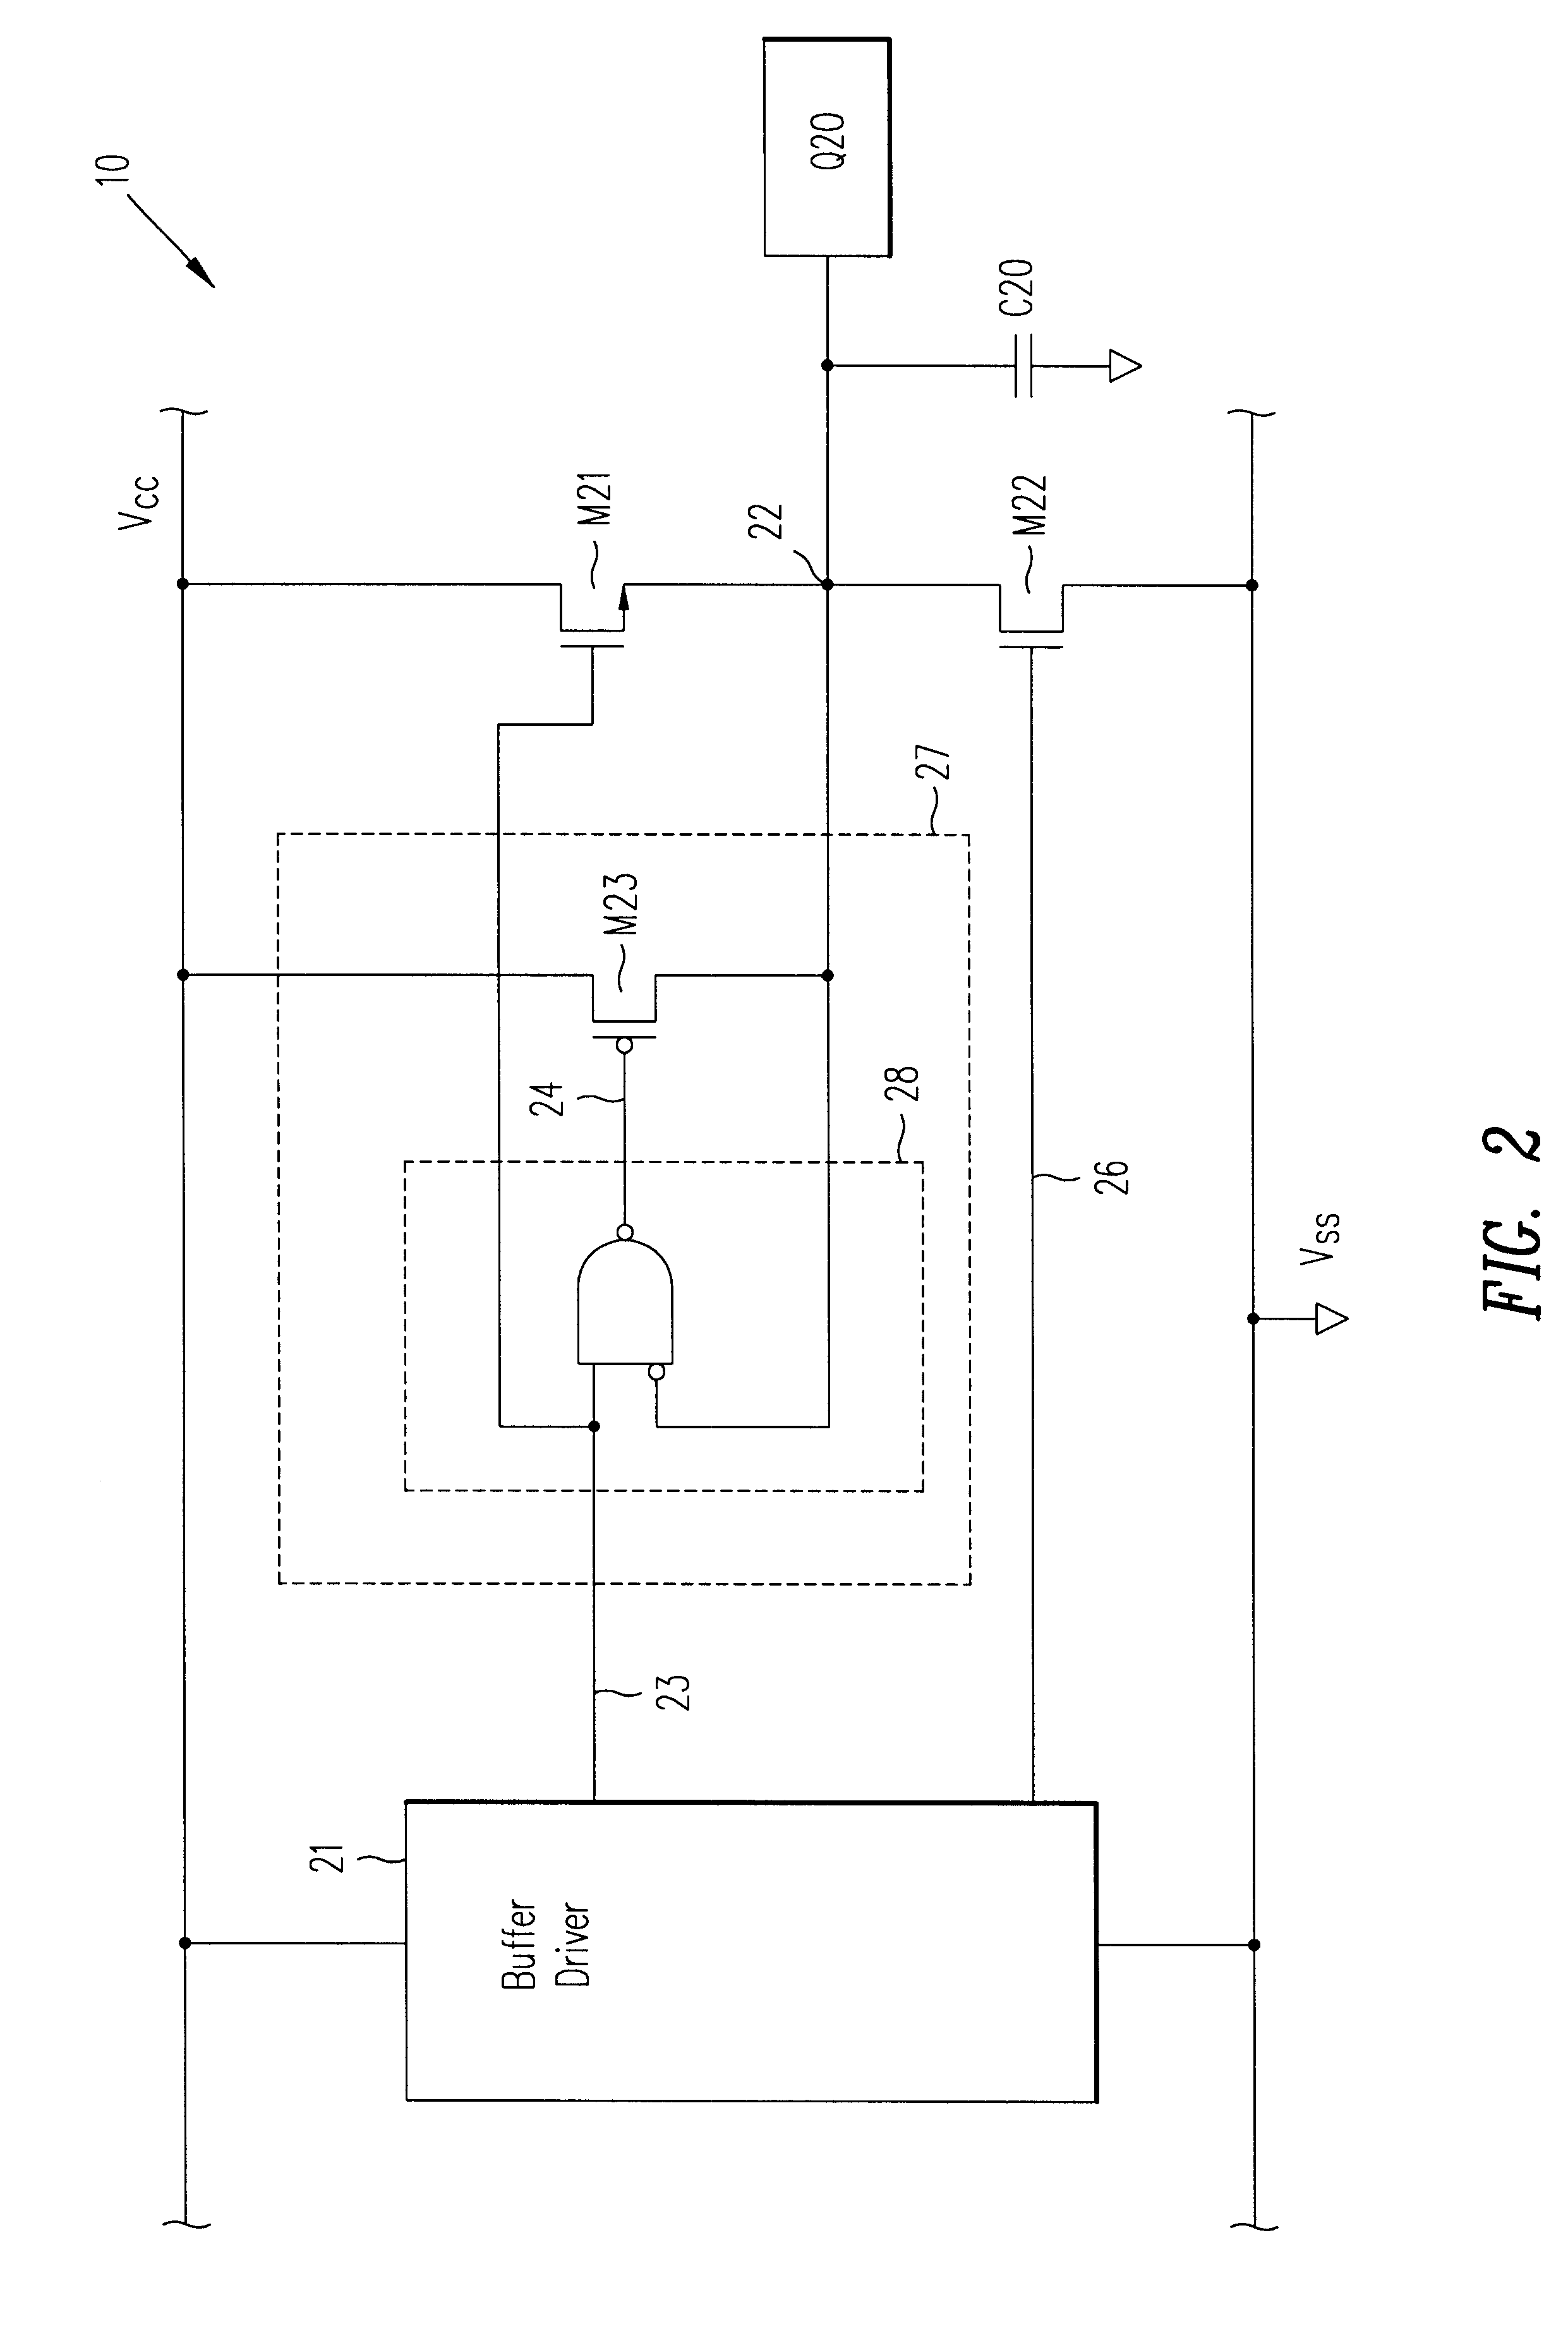 High speed buffer circuit with improved noise immunity